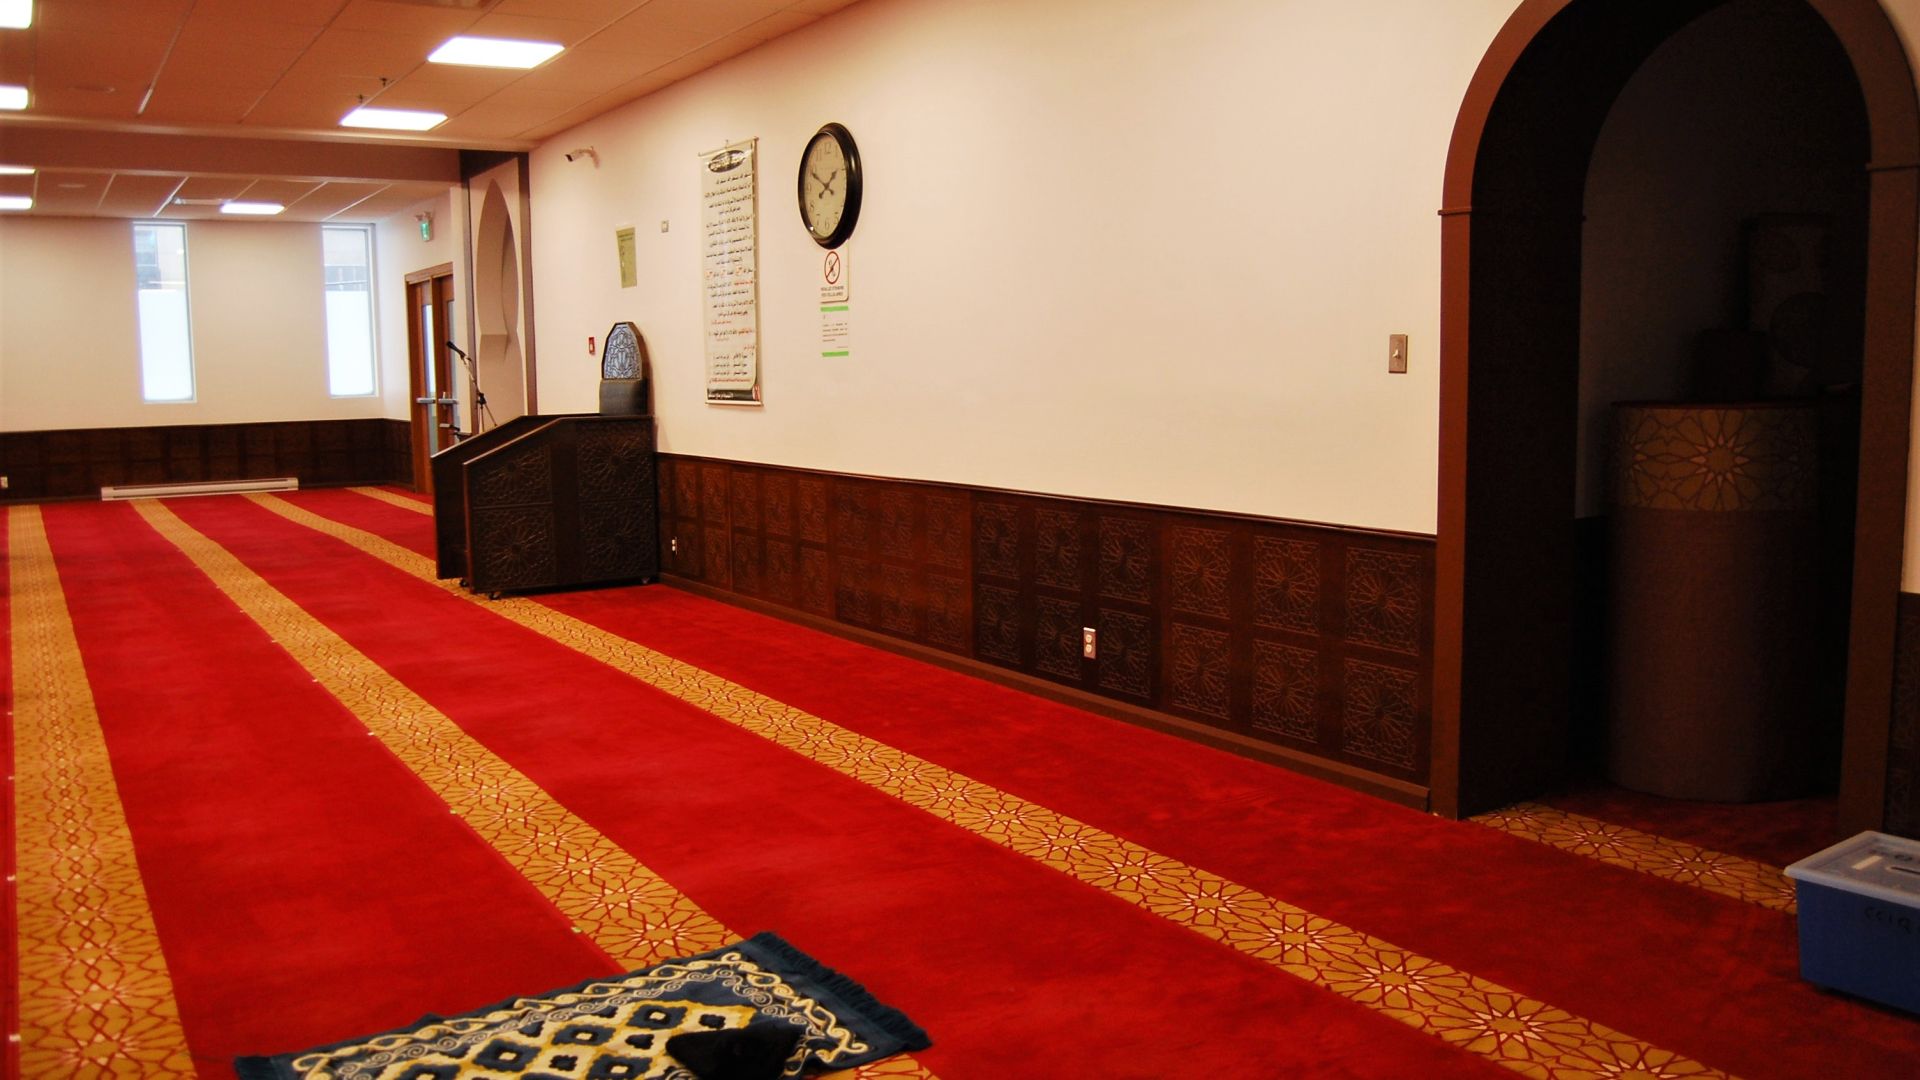 A view of the prayer room in the Quebec Islamic Cultural Centre